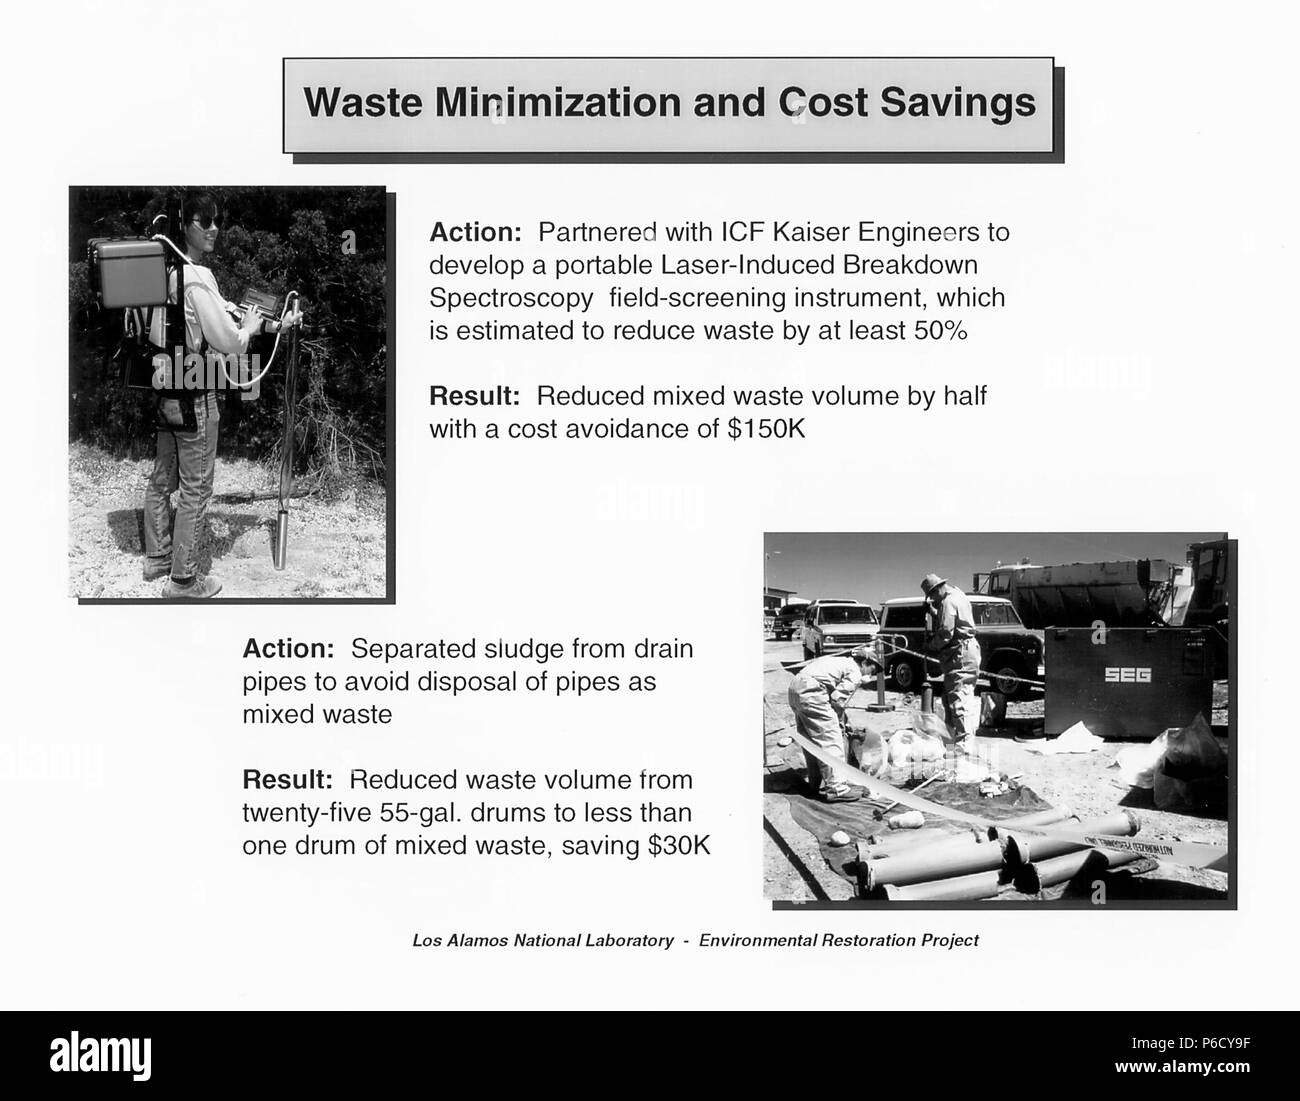 Waste minimization and cost savings proposal by the Los Alamos National Library for the Environmental Restoration Project, Los Alamos, New Mexico, 2016. Image courtesy US Department of Energy. () Stock Photo